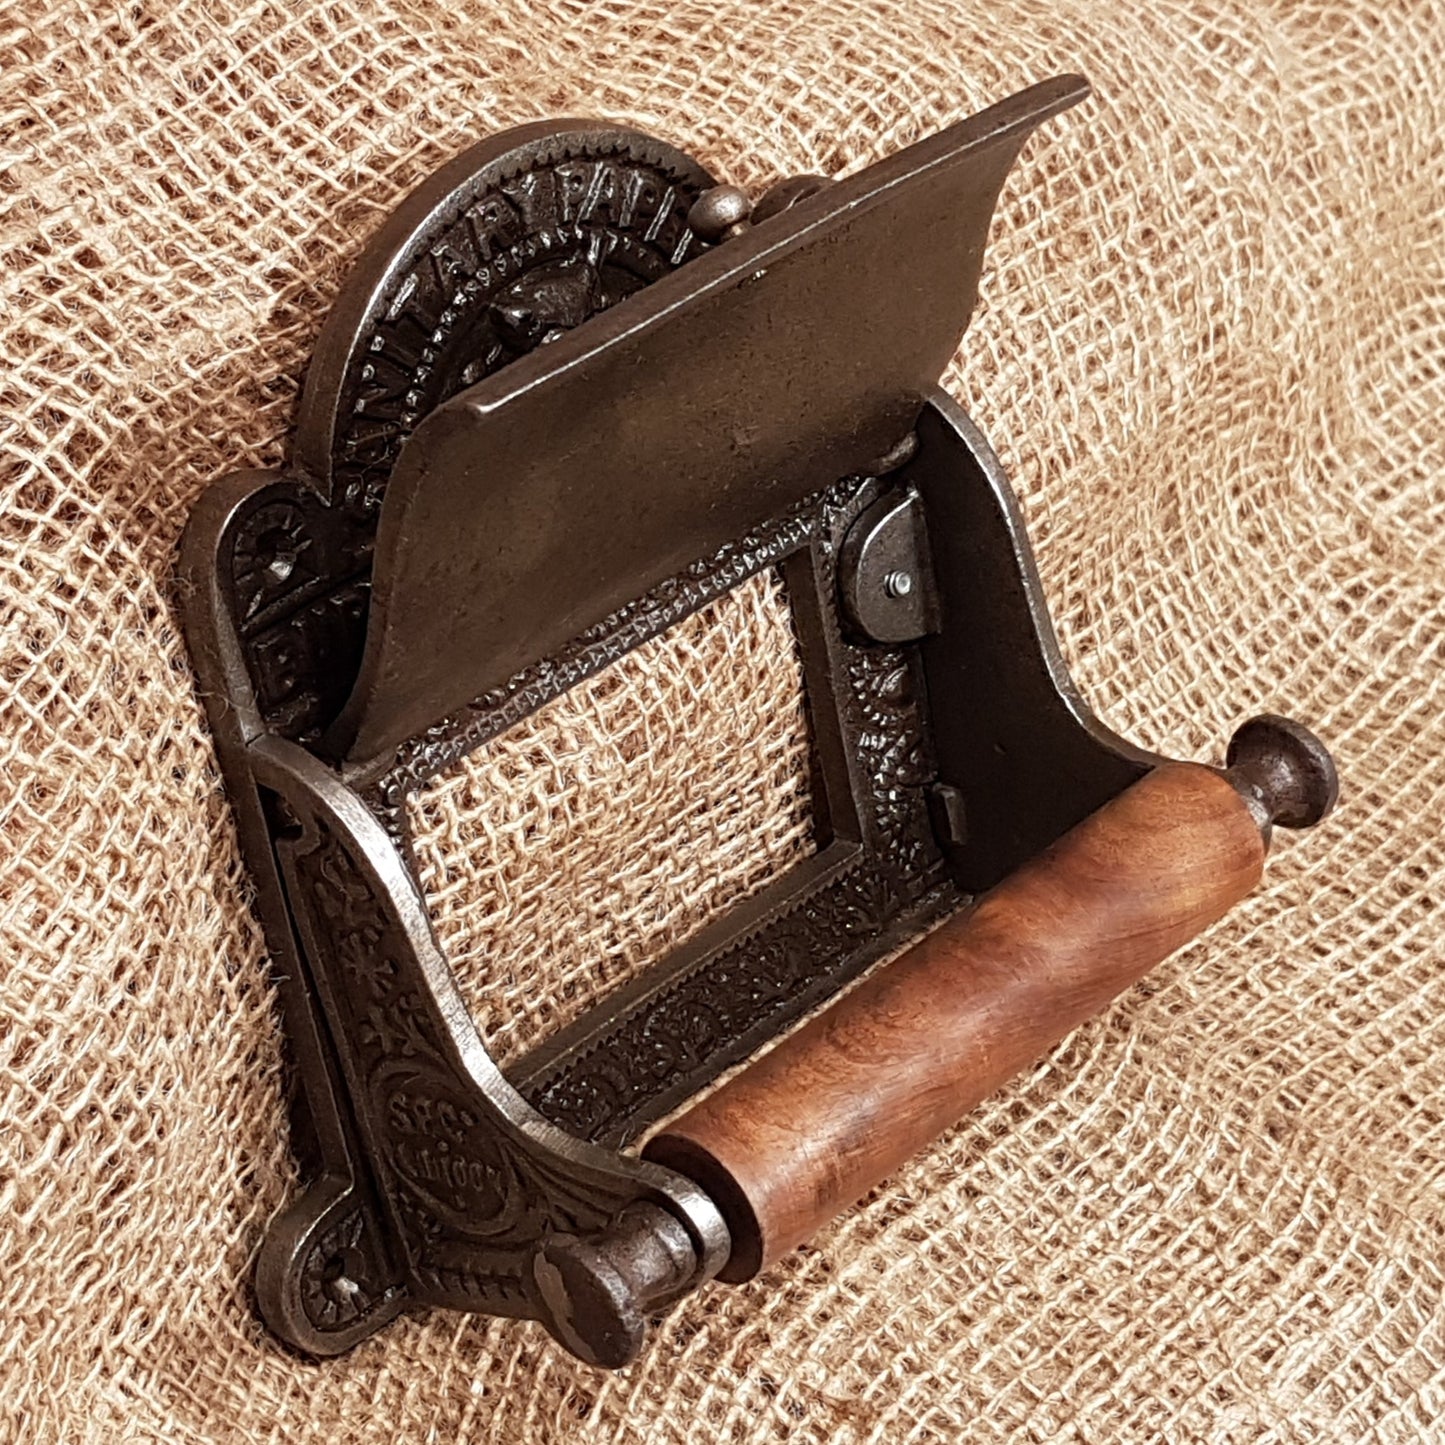 Bury St London Vintage Toilet Paper Holder Antique Iron - Spearhead Collection - Toilet Paper Holders - Bathroom Decor, Home Decor, Made in England, Toilet Paper Holders, Victorian